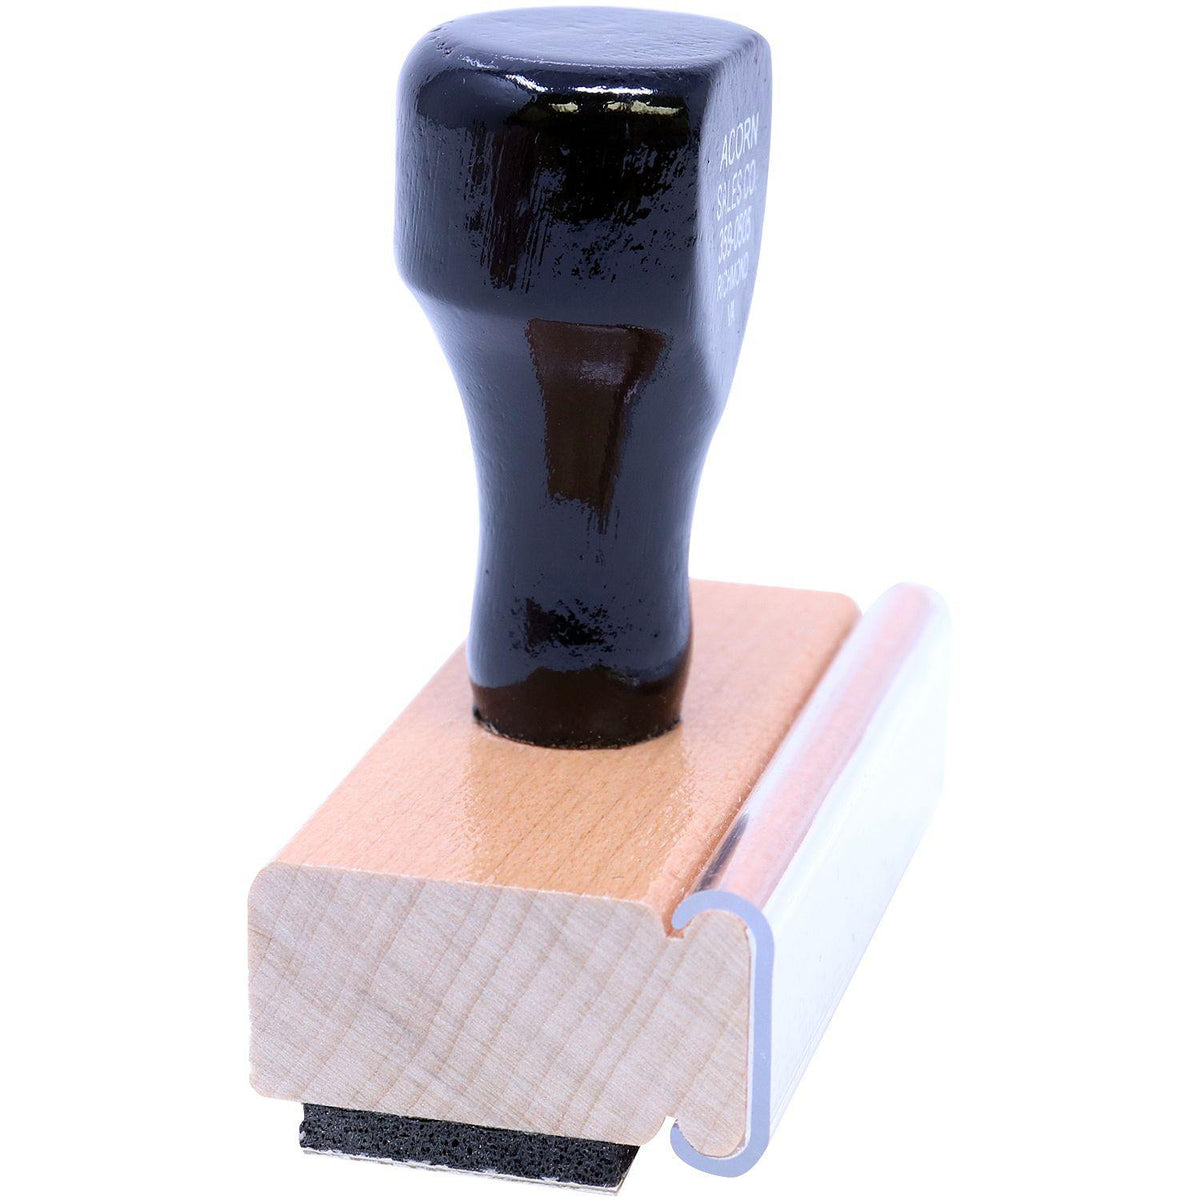 Side View of Large Please Review with your child Rubber Stamp at an Angle